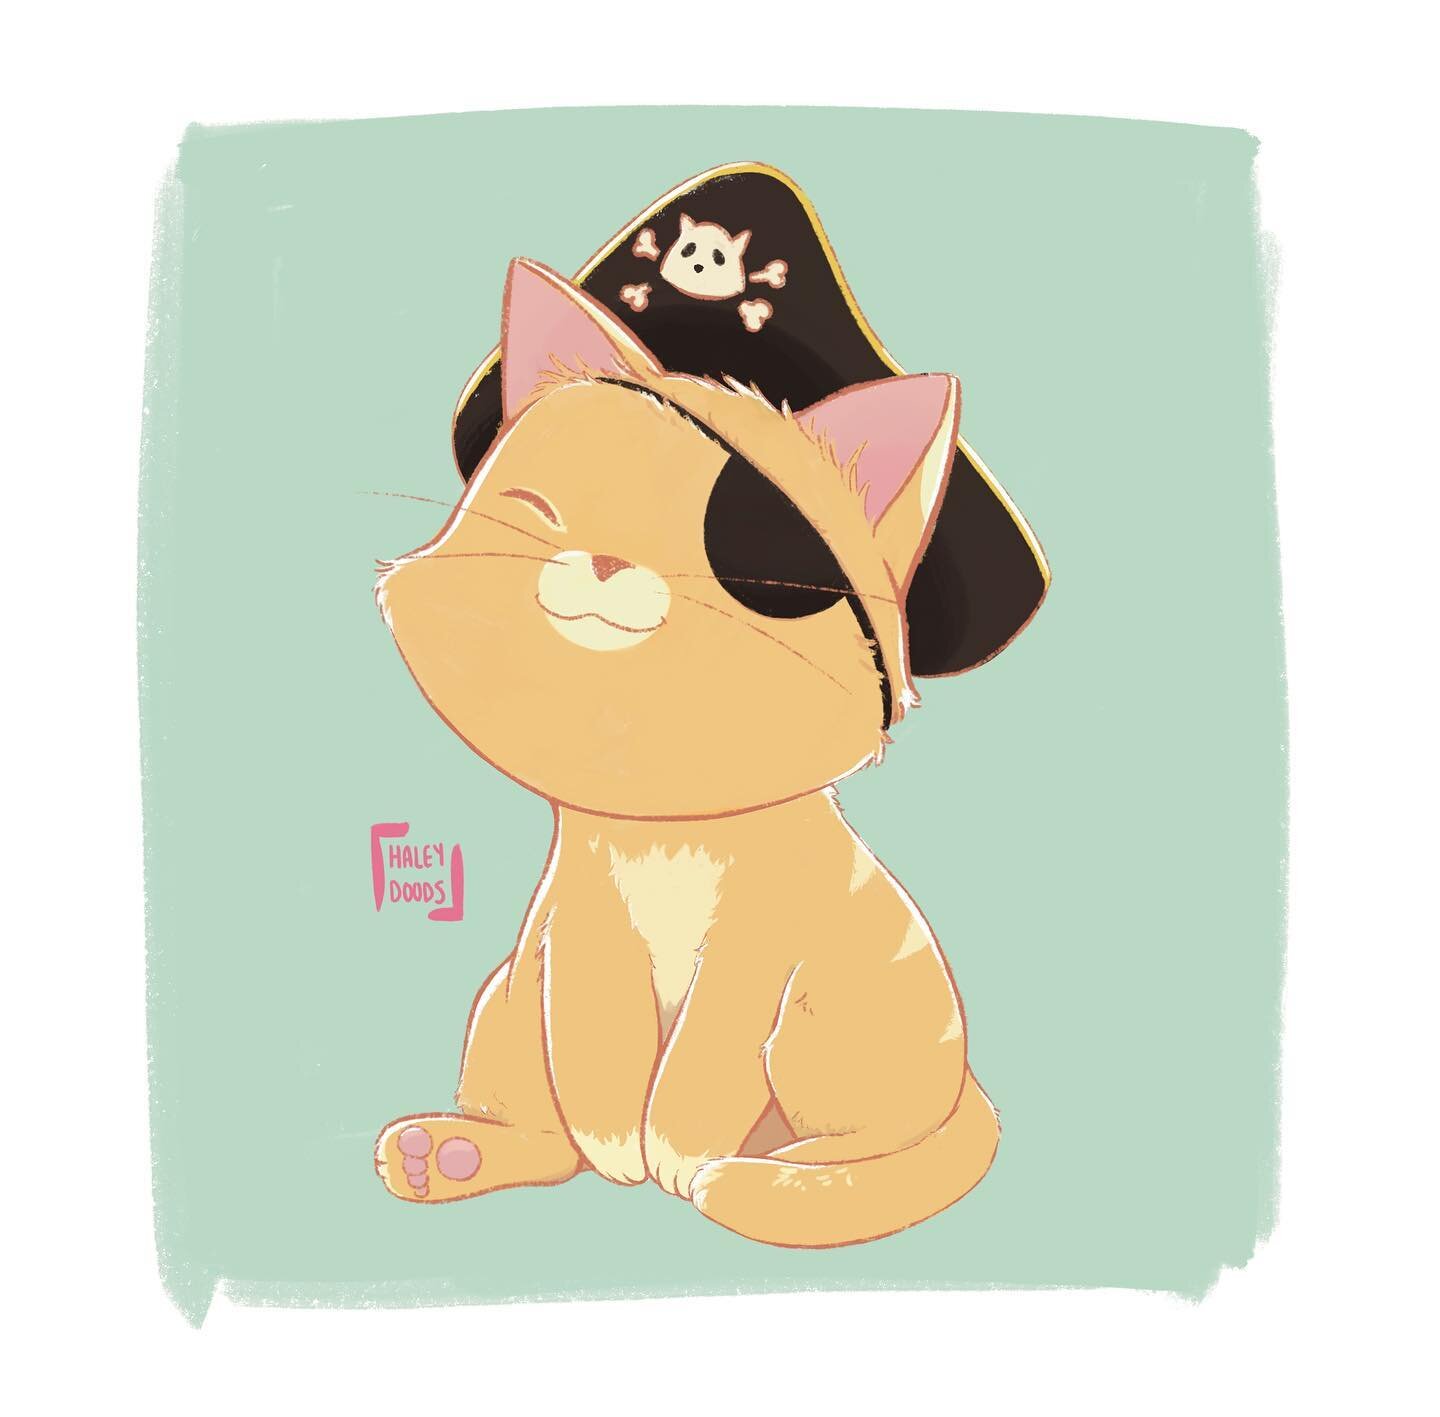 My grandma&rsquo;s cat, Sunny, had glaucoma in an eye 🥺 so we had it removed and now he&rsquo;s Sunny the Pirate 🥹
.
.
.
#animalillustration #catsofinstagram #catillustration #childrensbookillustration #illustratorsoninstagram #illustratorsofinstag